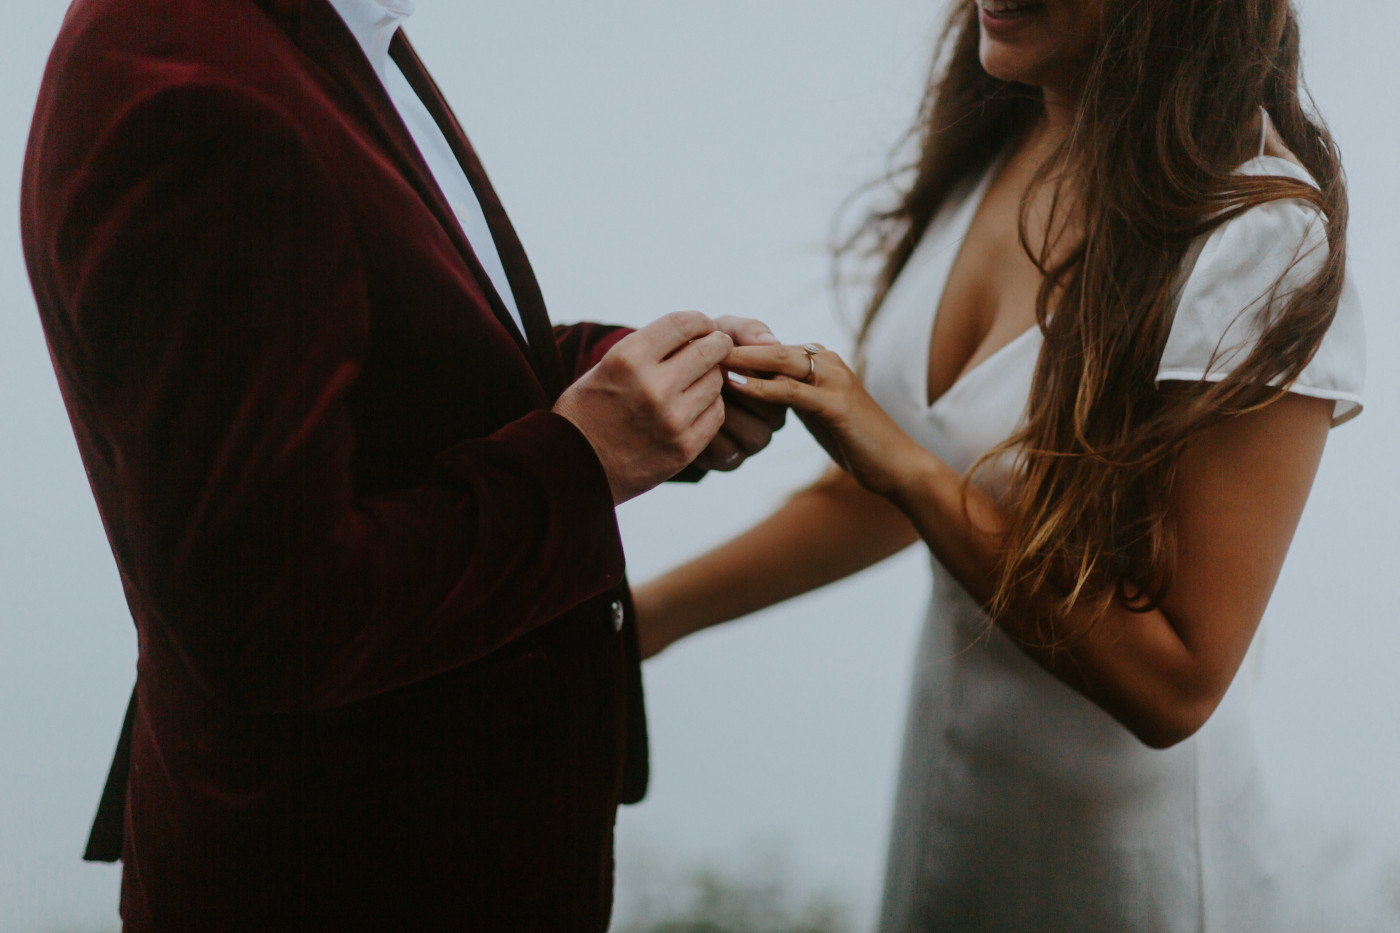 Murray goes to put a ring on Katelyn's finger. Elopement wedding photography at Mount Hood by Sienna Plus Josh.